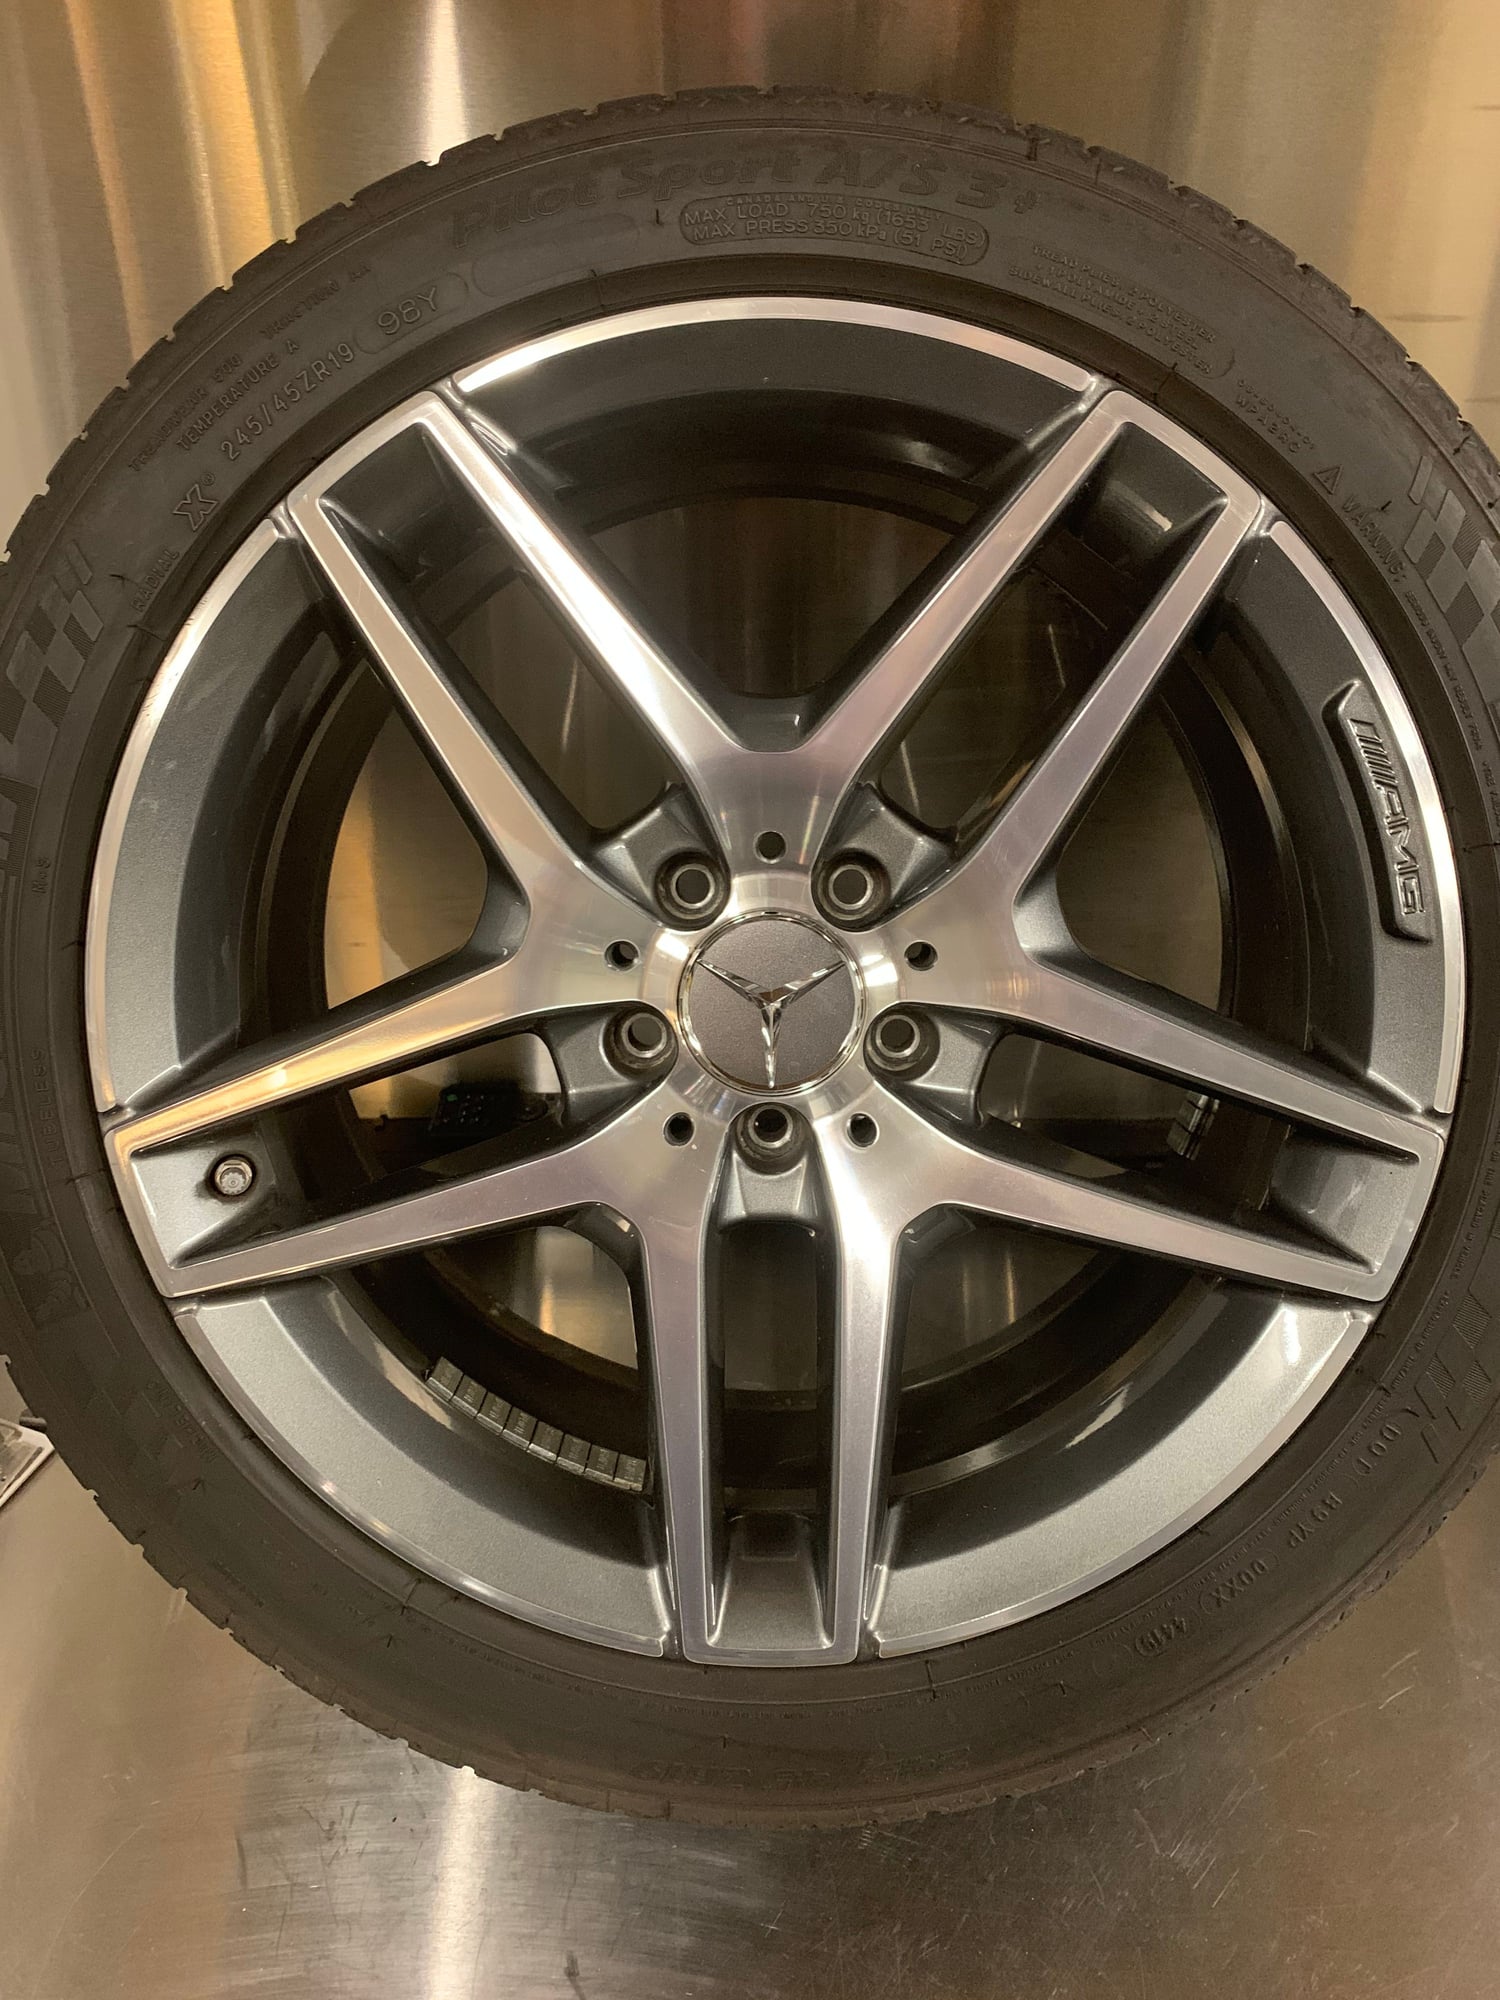 Wheels and Tires/Axles - 2015 S550 AMG Sport Rims and Tires 19" Staggered Setup with newer tires - Used - All Years Mercedes-Benz All Models - Newcastle, WA 98059, United States